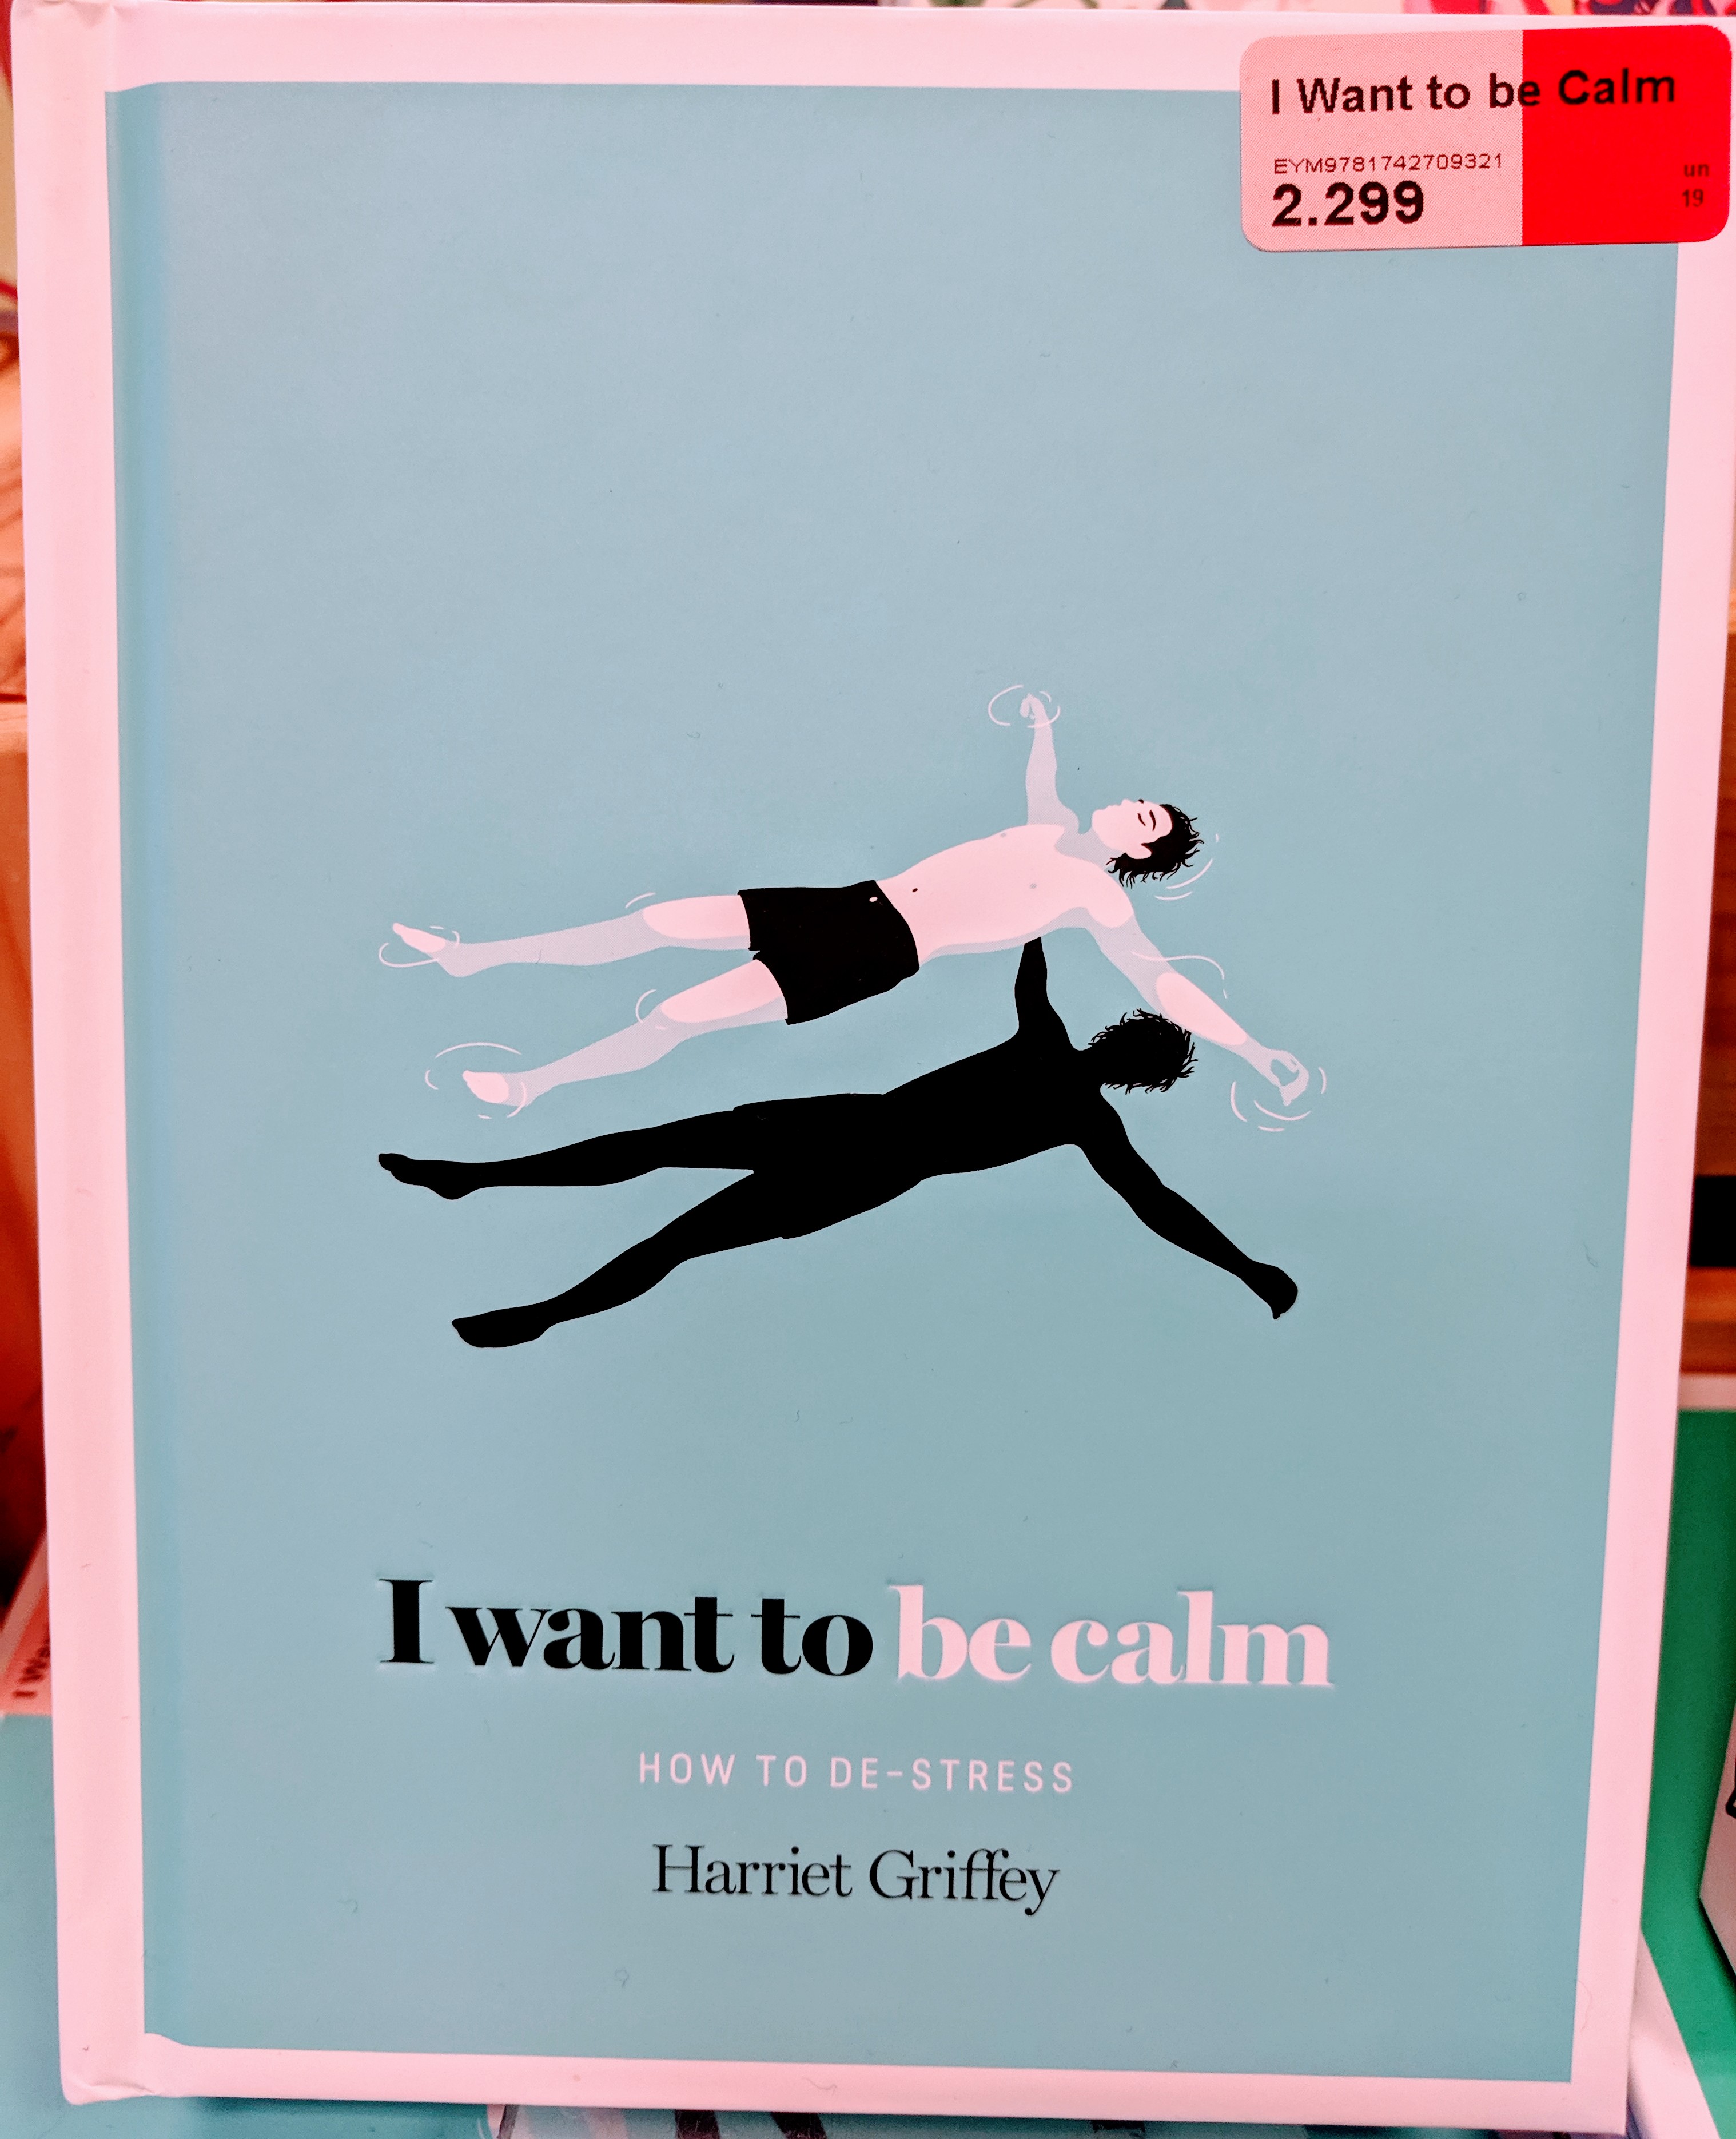 I want to be calm